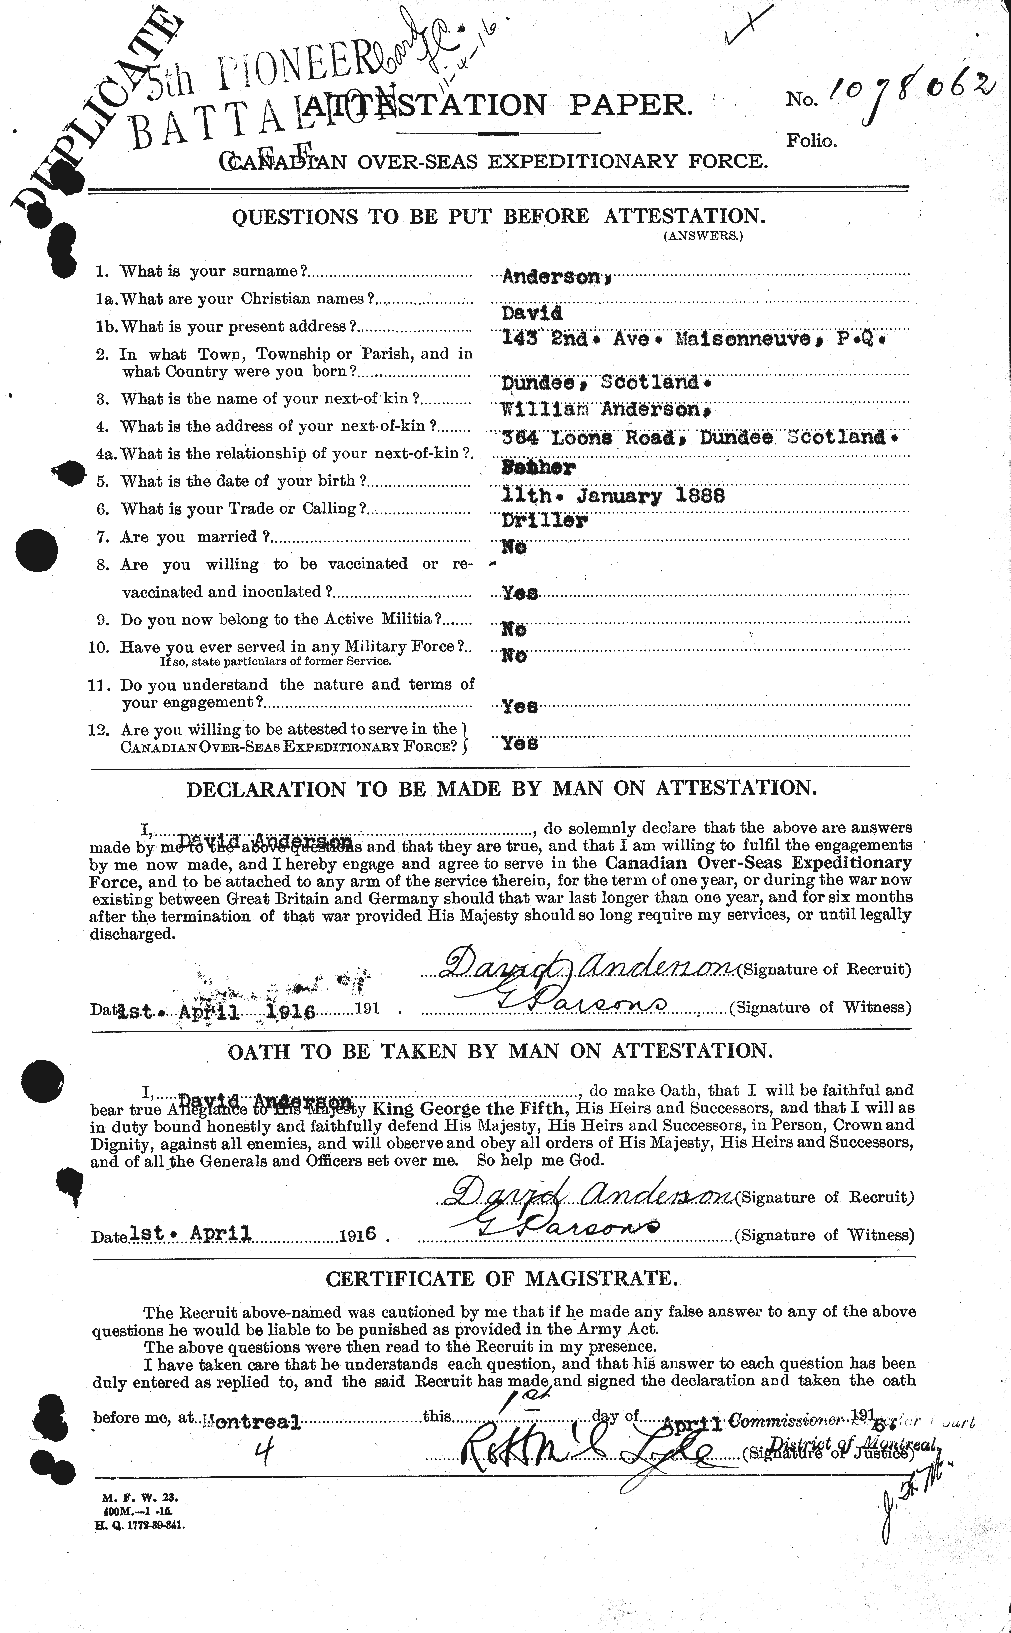 Personnel Records of the First World War - CEF 210040a